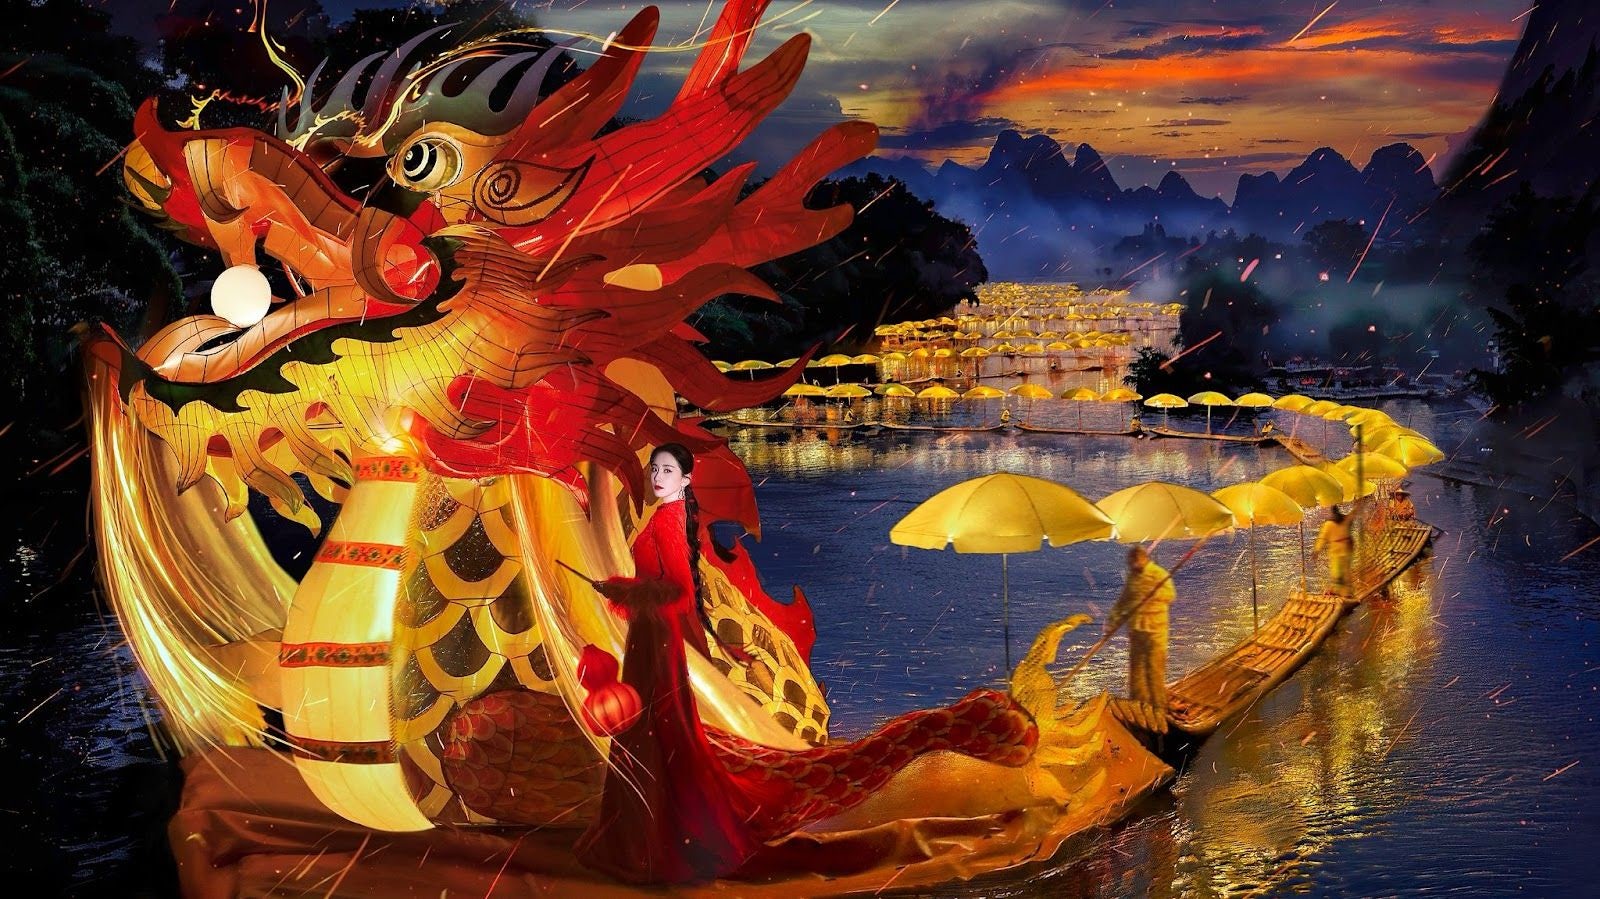 Qeelin’s Chinese New Year campaign explores folk culture, earns praise